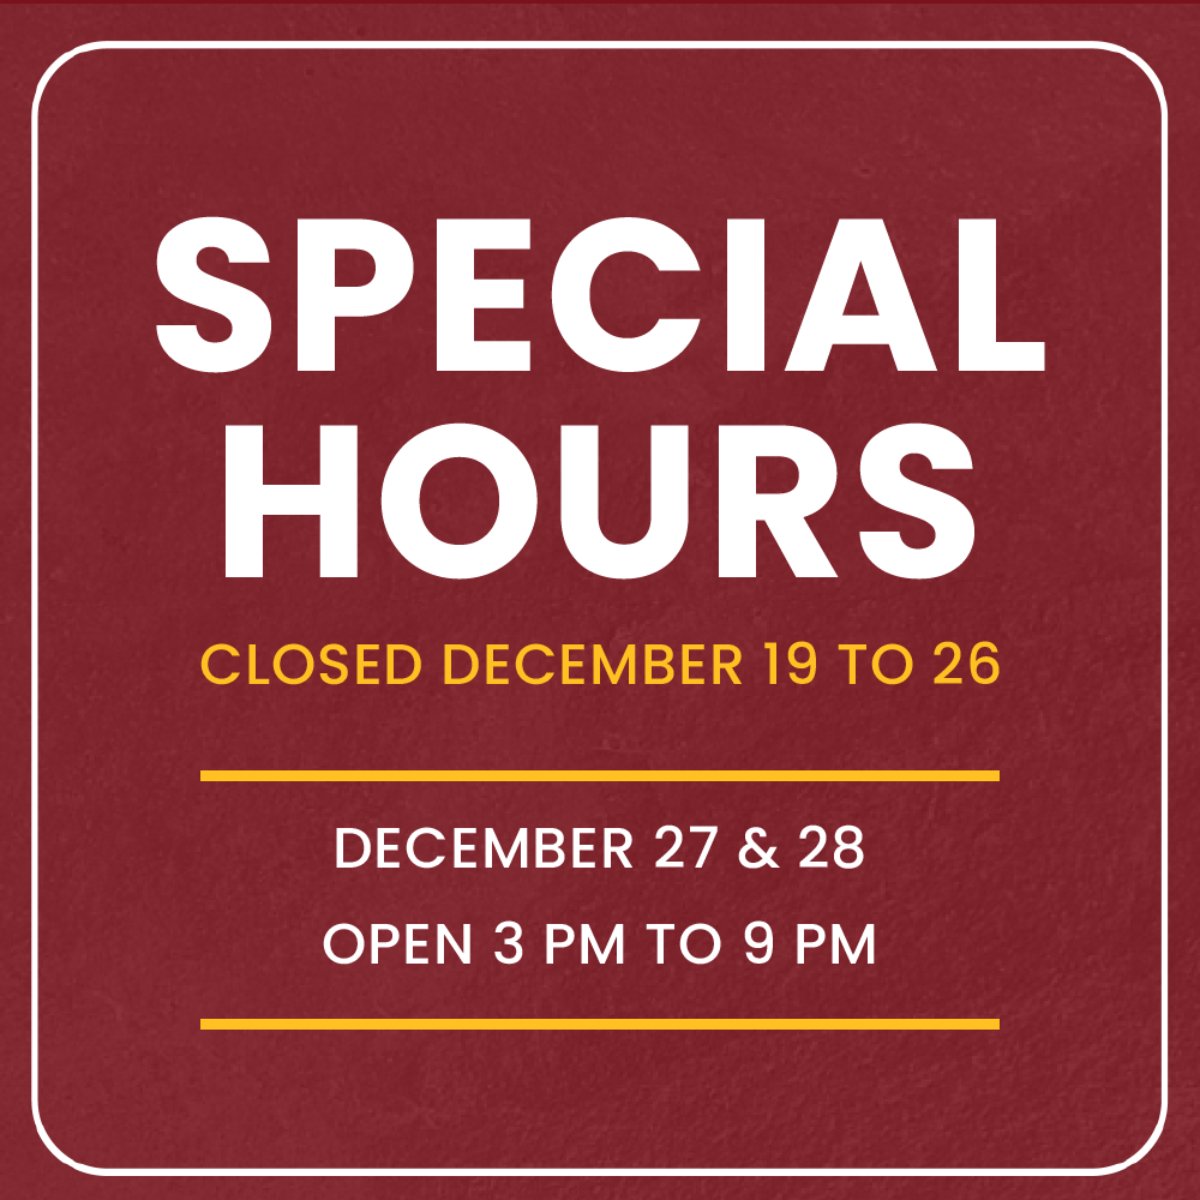 Please note, we have special holiday hours starting next week. We will be closed from Dec. 19 to 26, and then open from 3 PM to 9 PM on Dec. 27 and 28. Check our schedule before coming by to enjoy your favorite dishes.   #TartagliasPizza #ArtisanalPizza #BrickovenPizza #CamptonNH